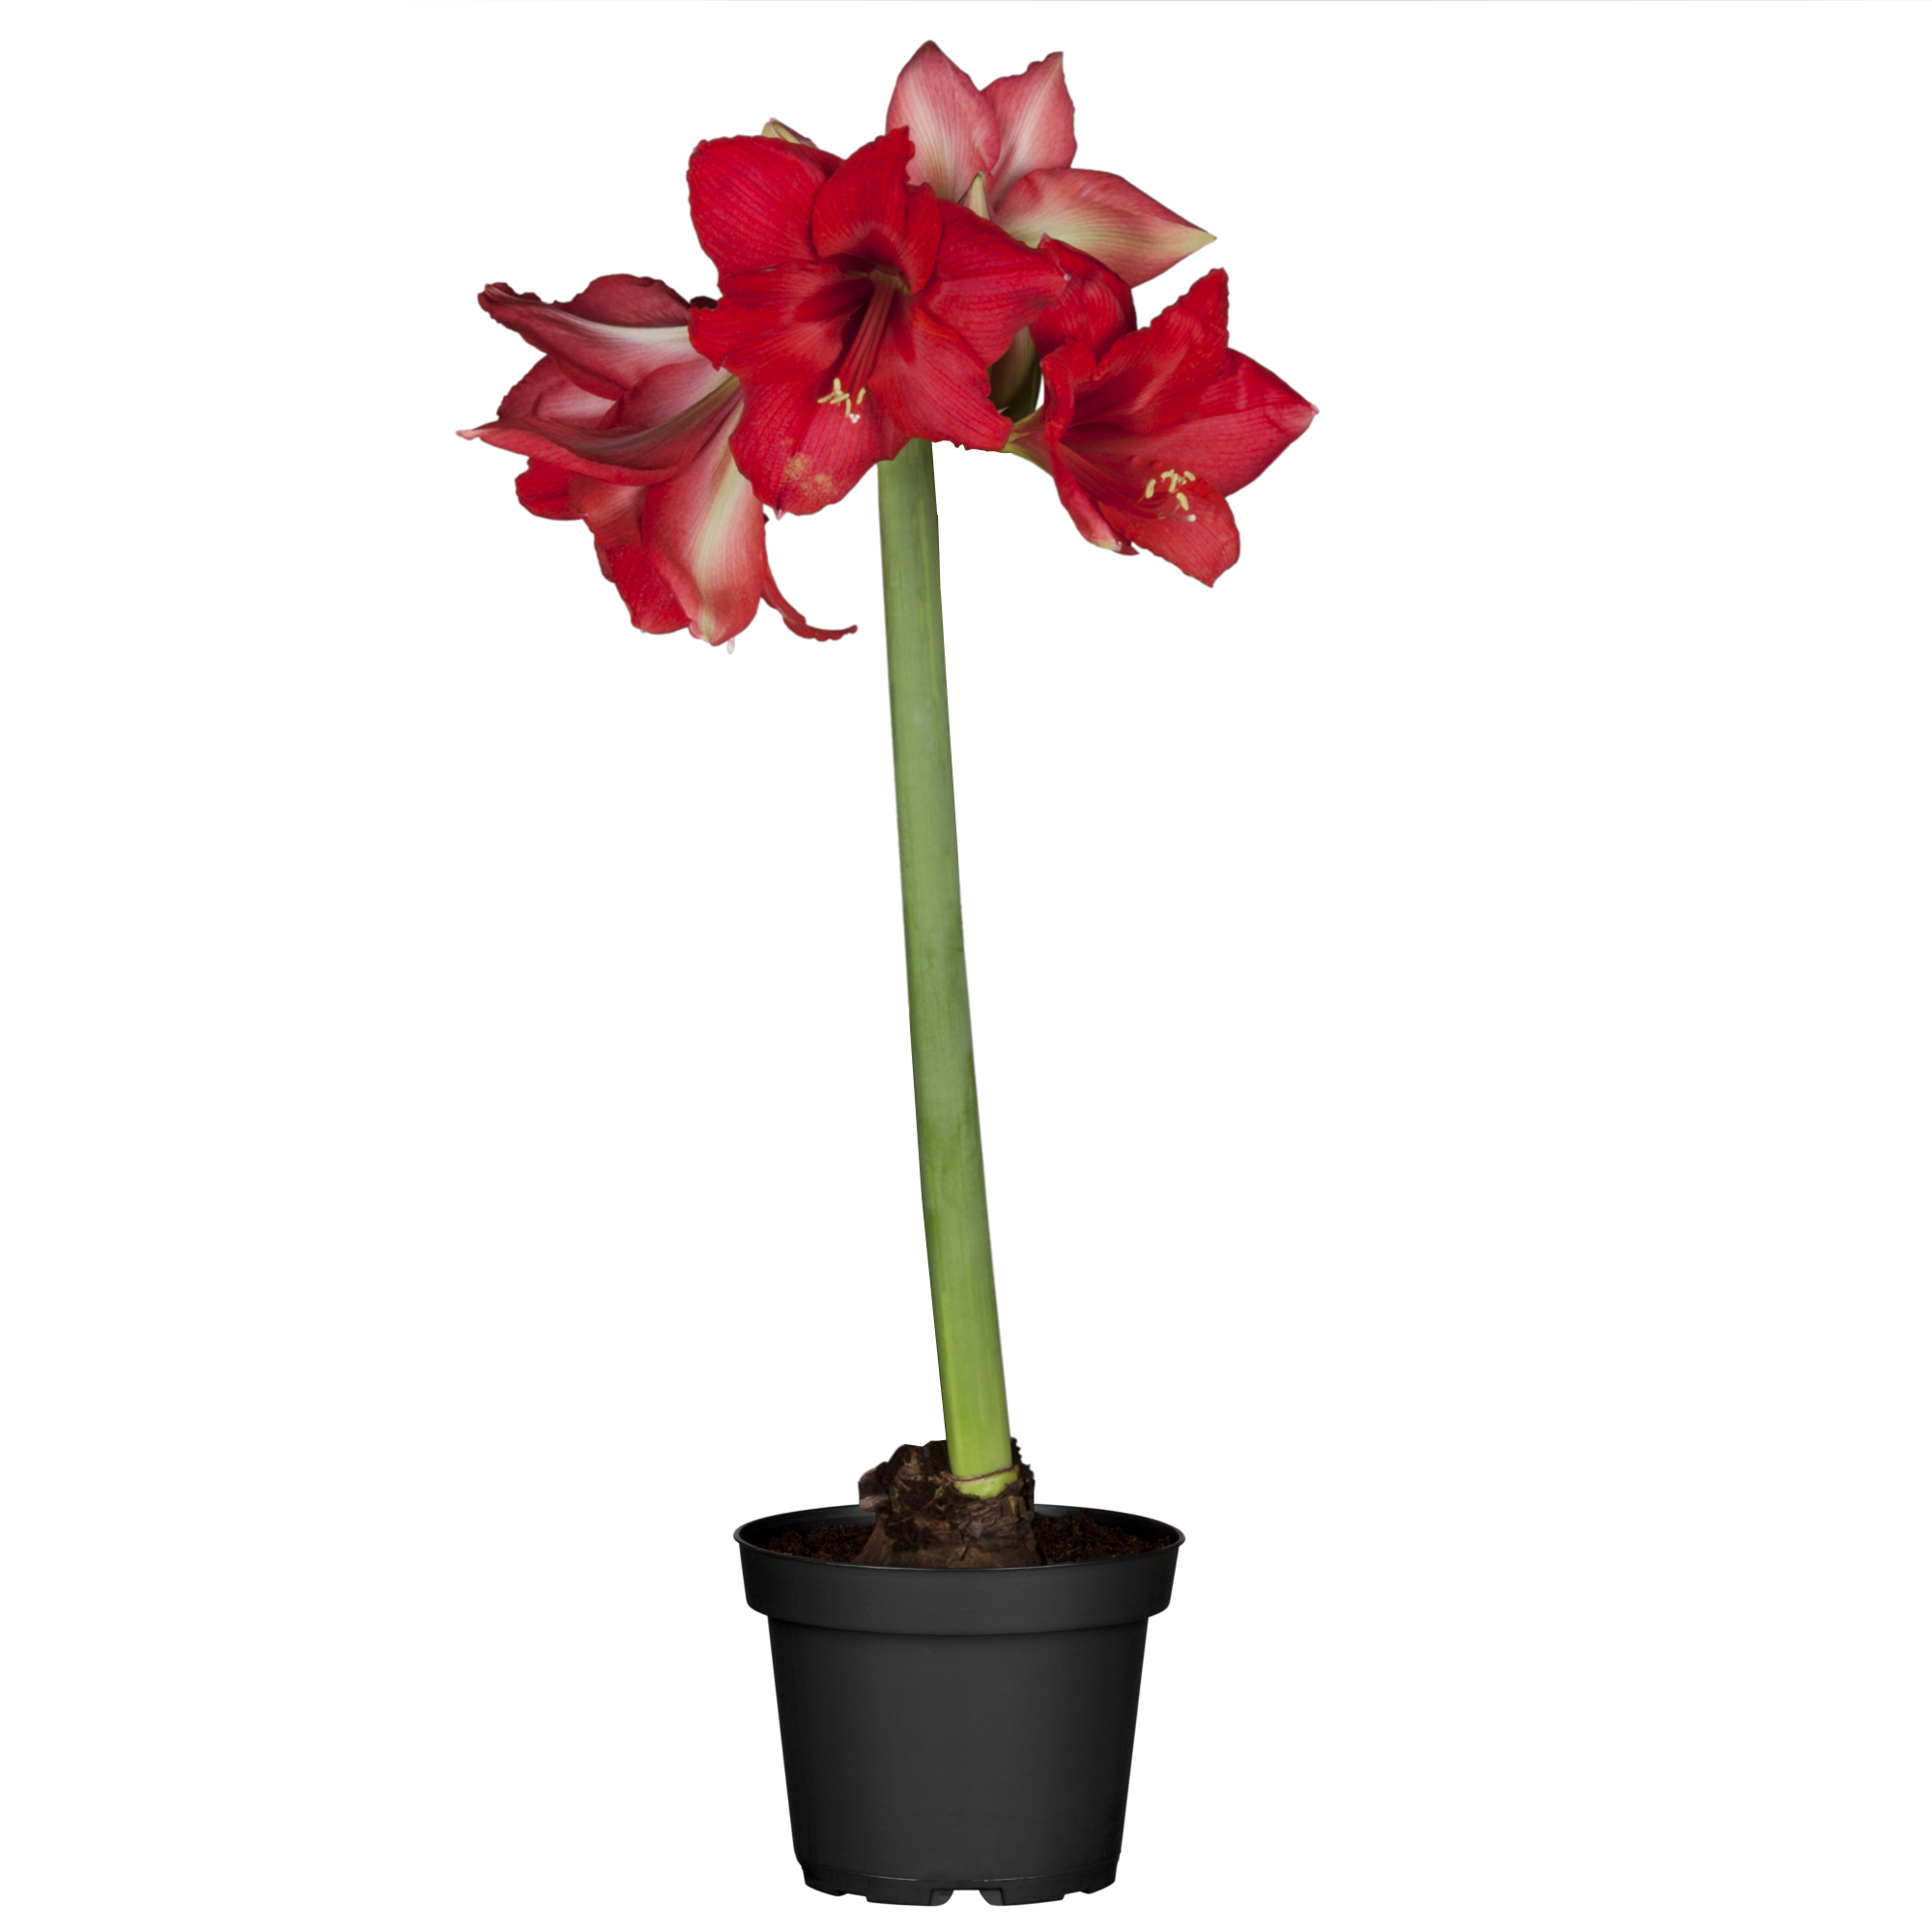 Amaryllis rot 12 cm Topf + product picture